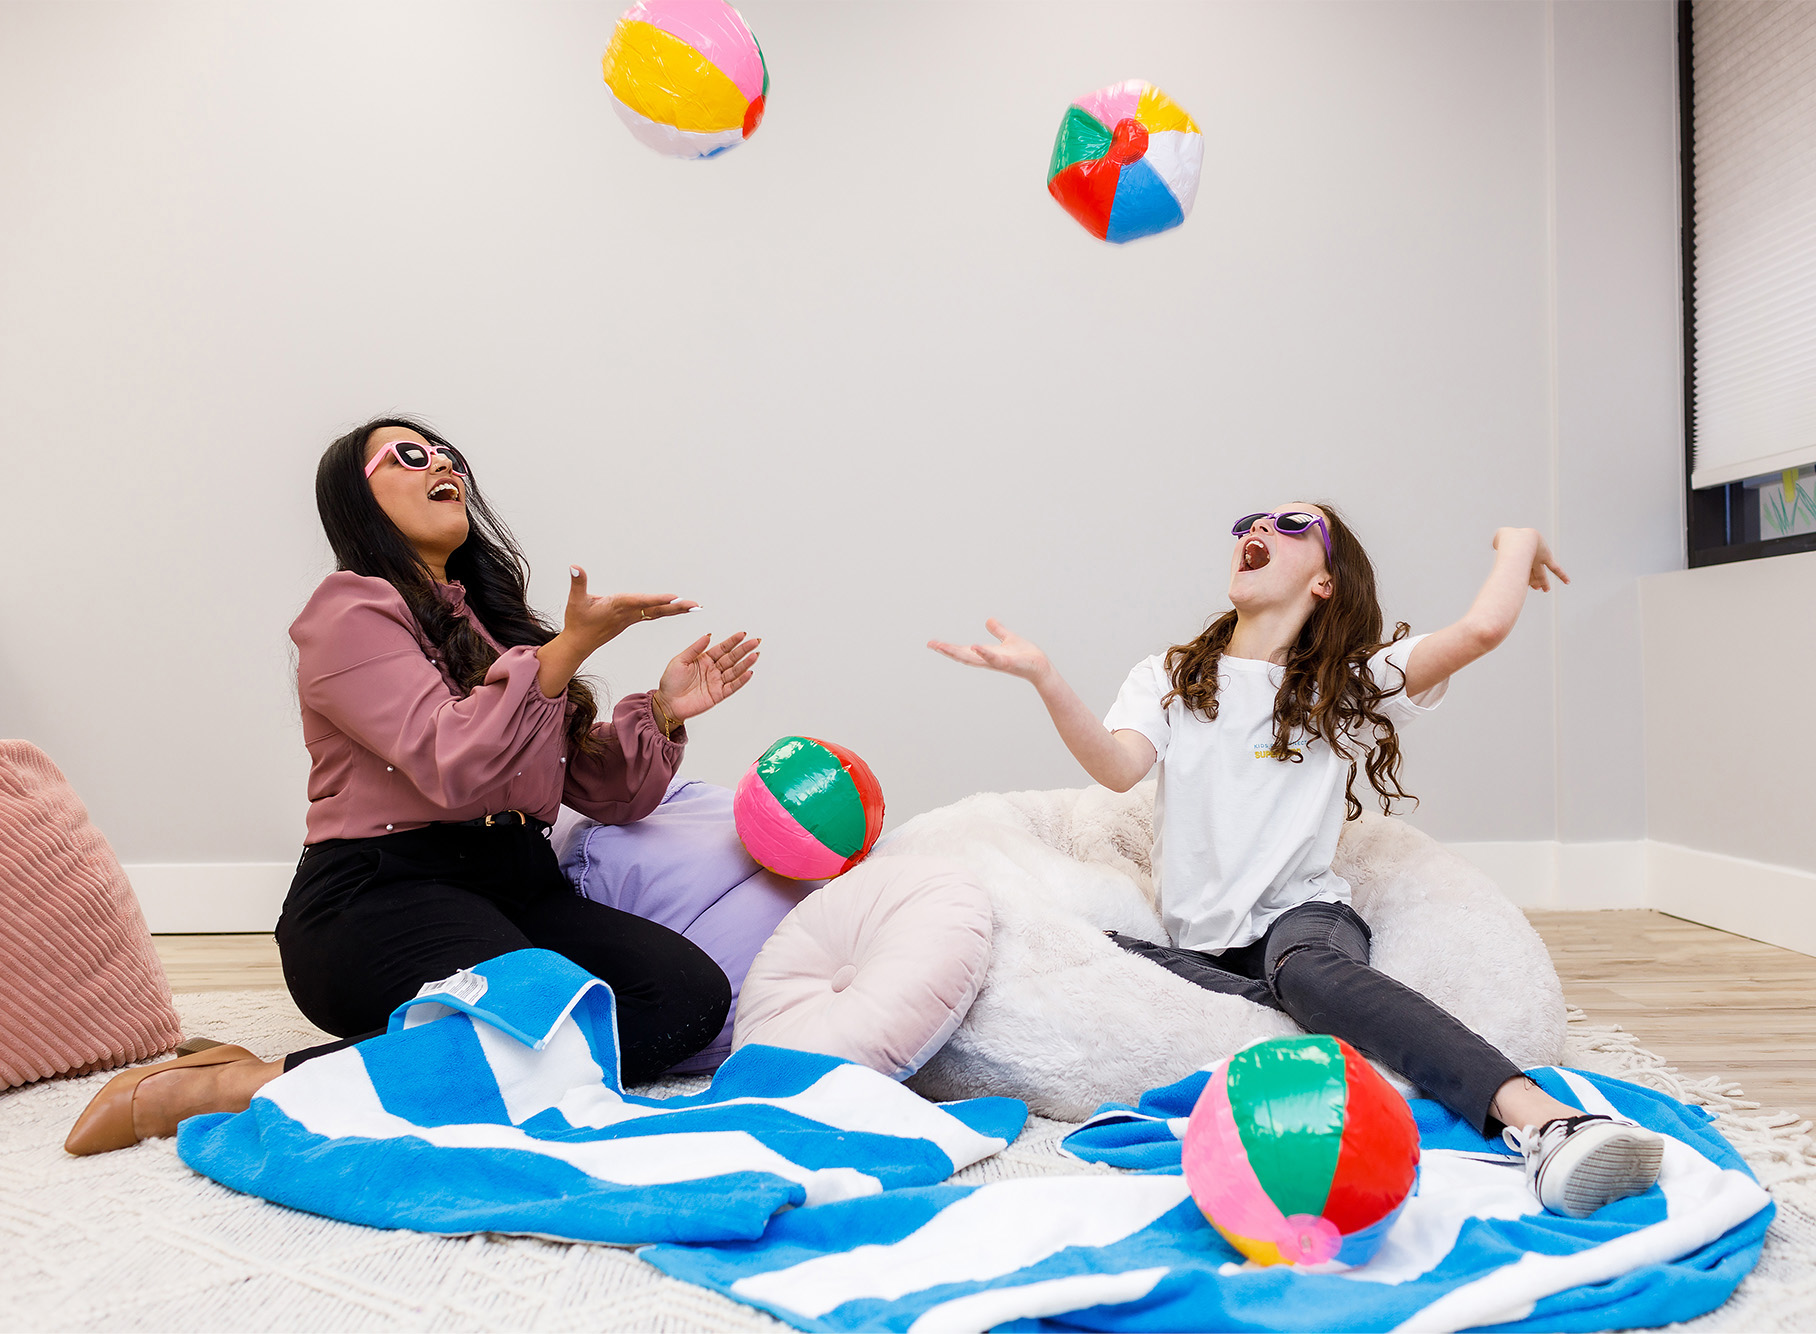 A child and her therapist wearing sunglasses, sitting on beach towels and throwing four colourful beach balls in the air, during a play therapy session.